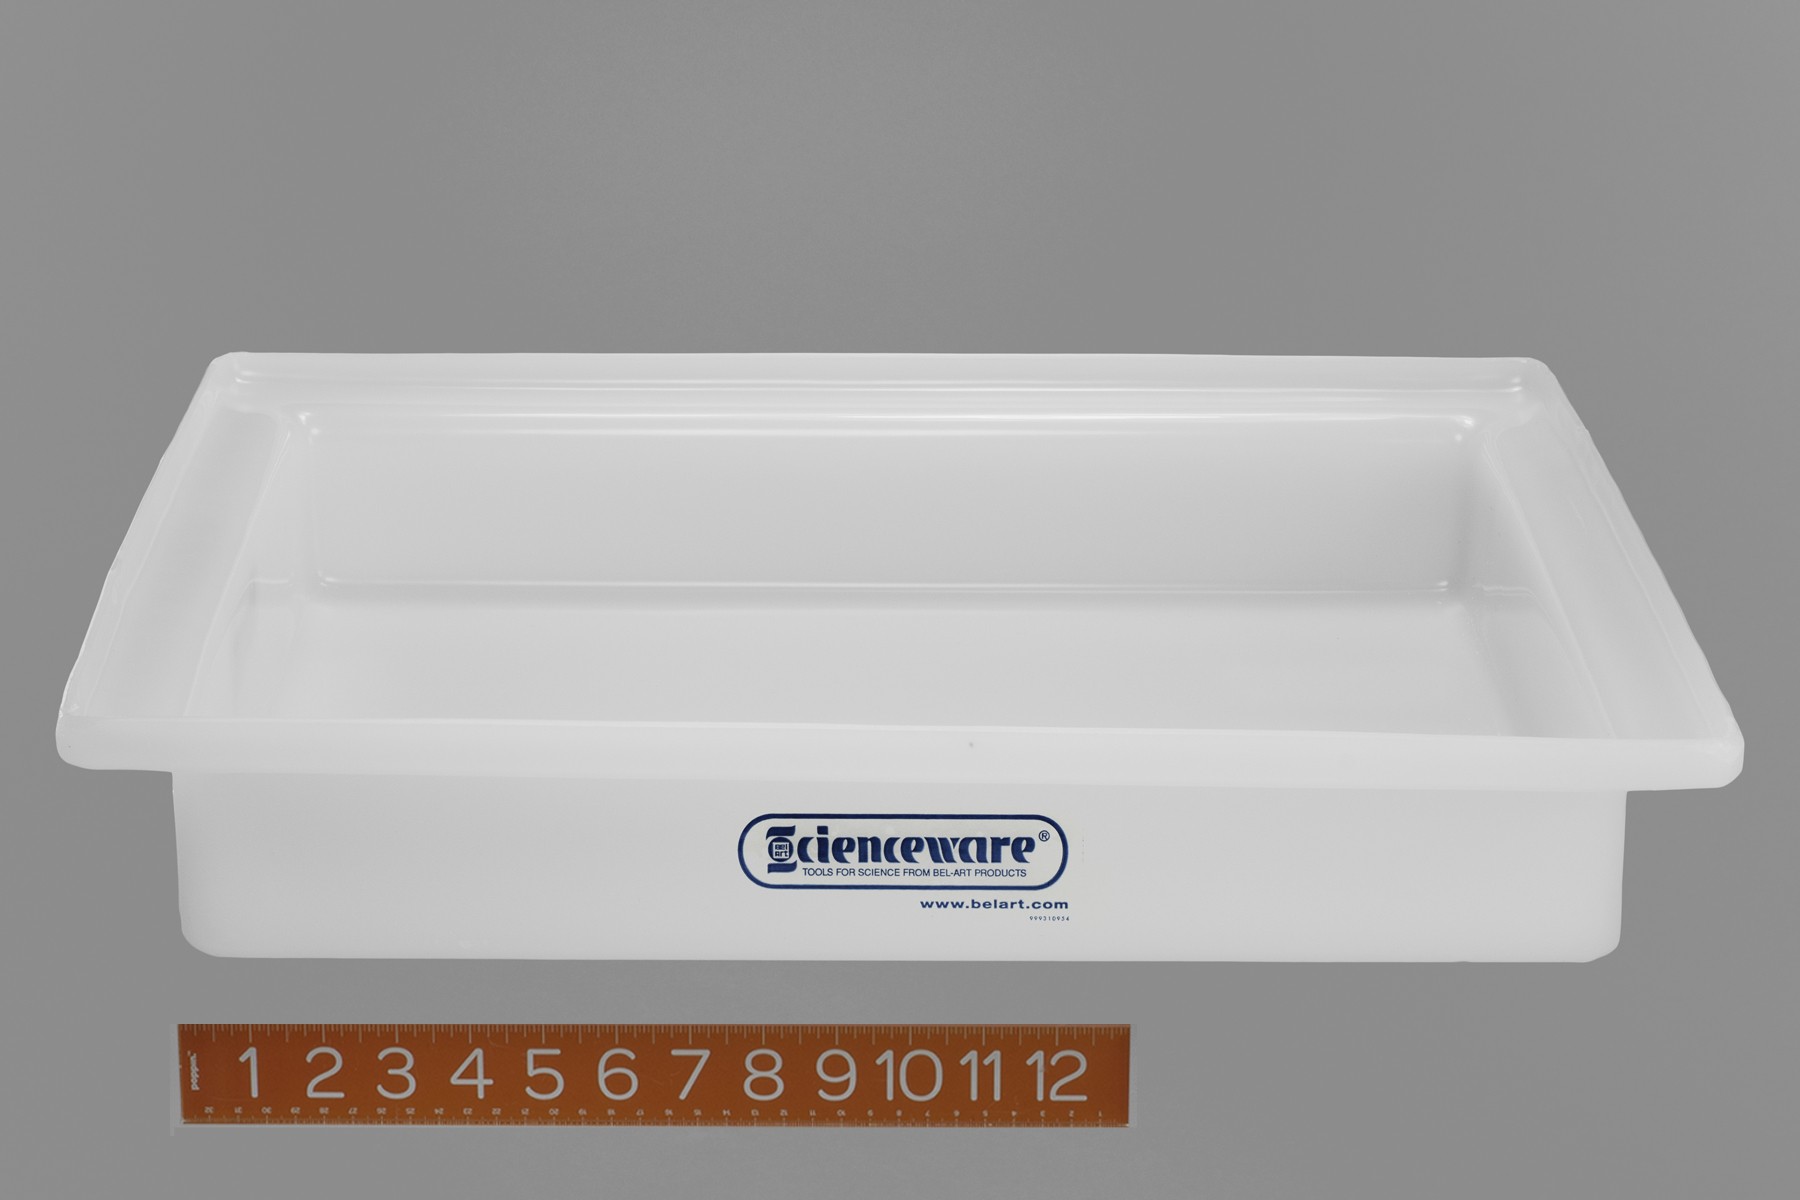 SP Bel-Art General Purpose Polyethylene Tray without Faucet; 16 x 20 x 3 in.